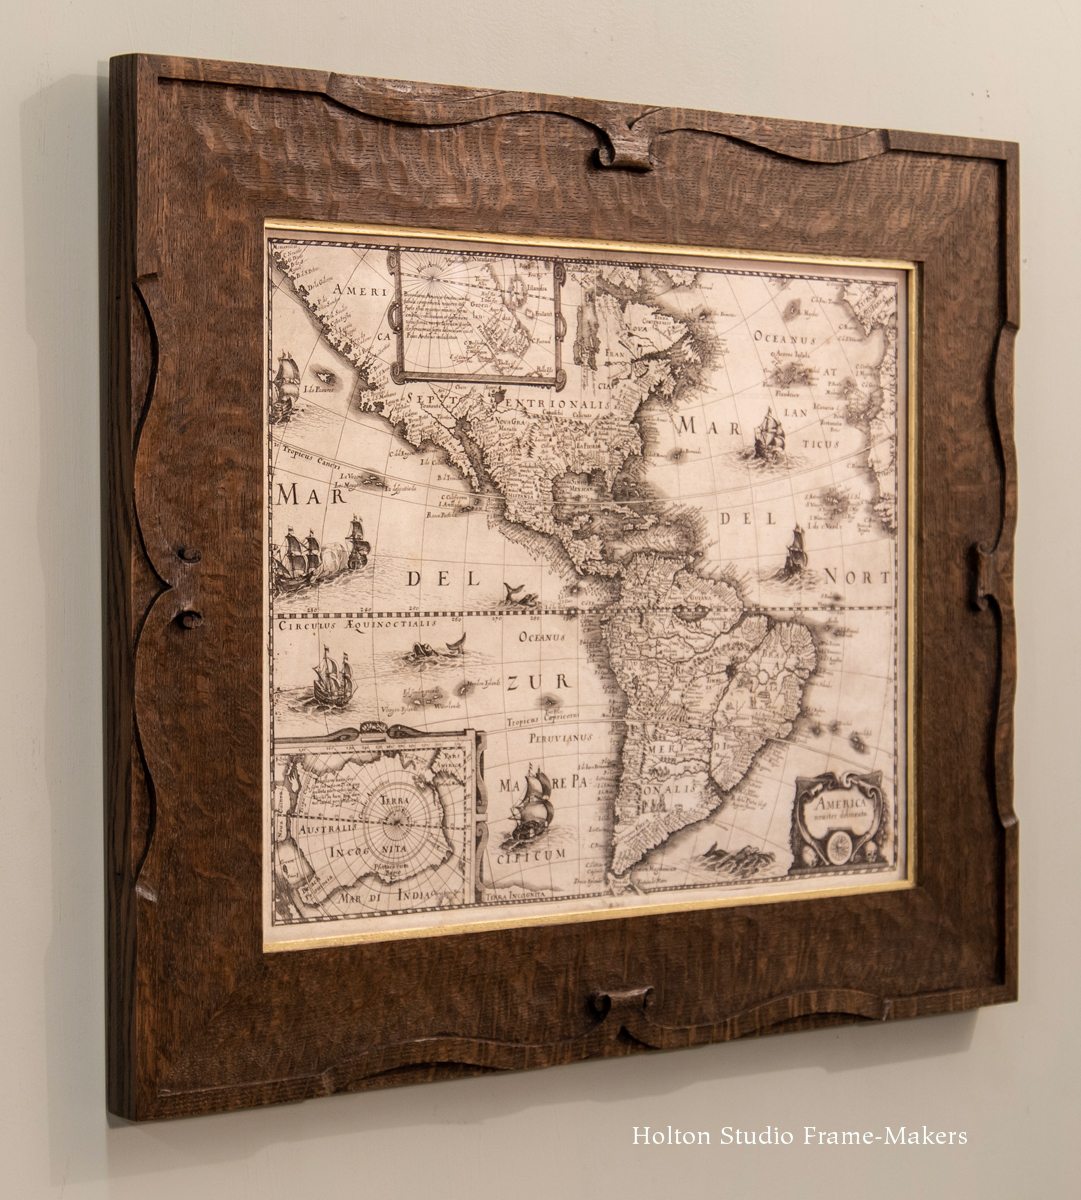 Framed 17th century map of Americas